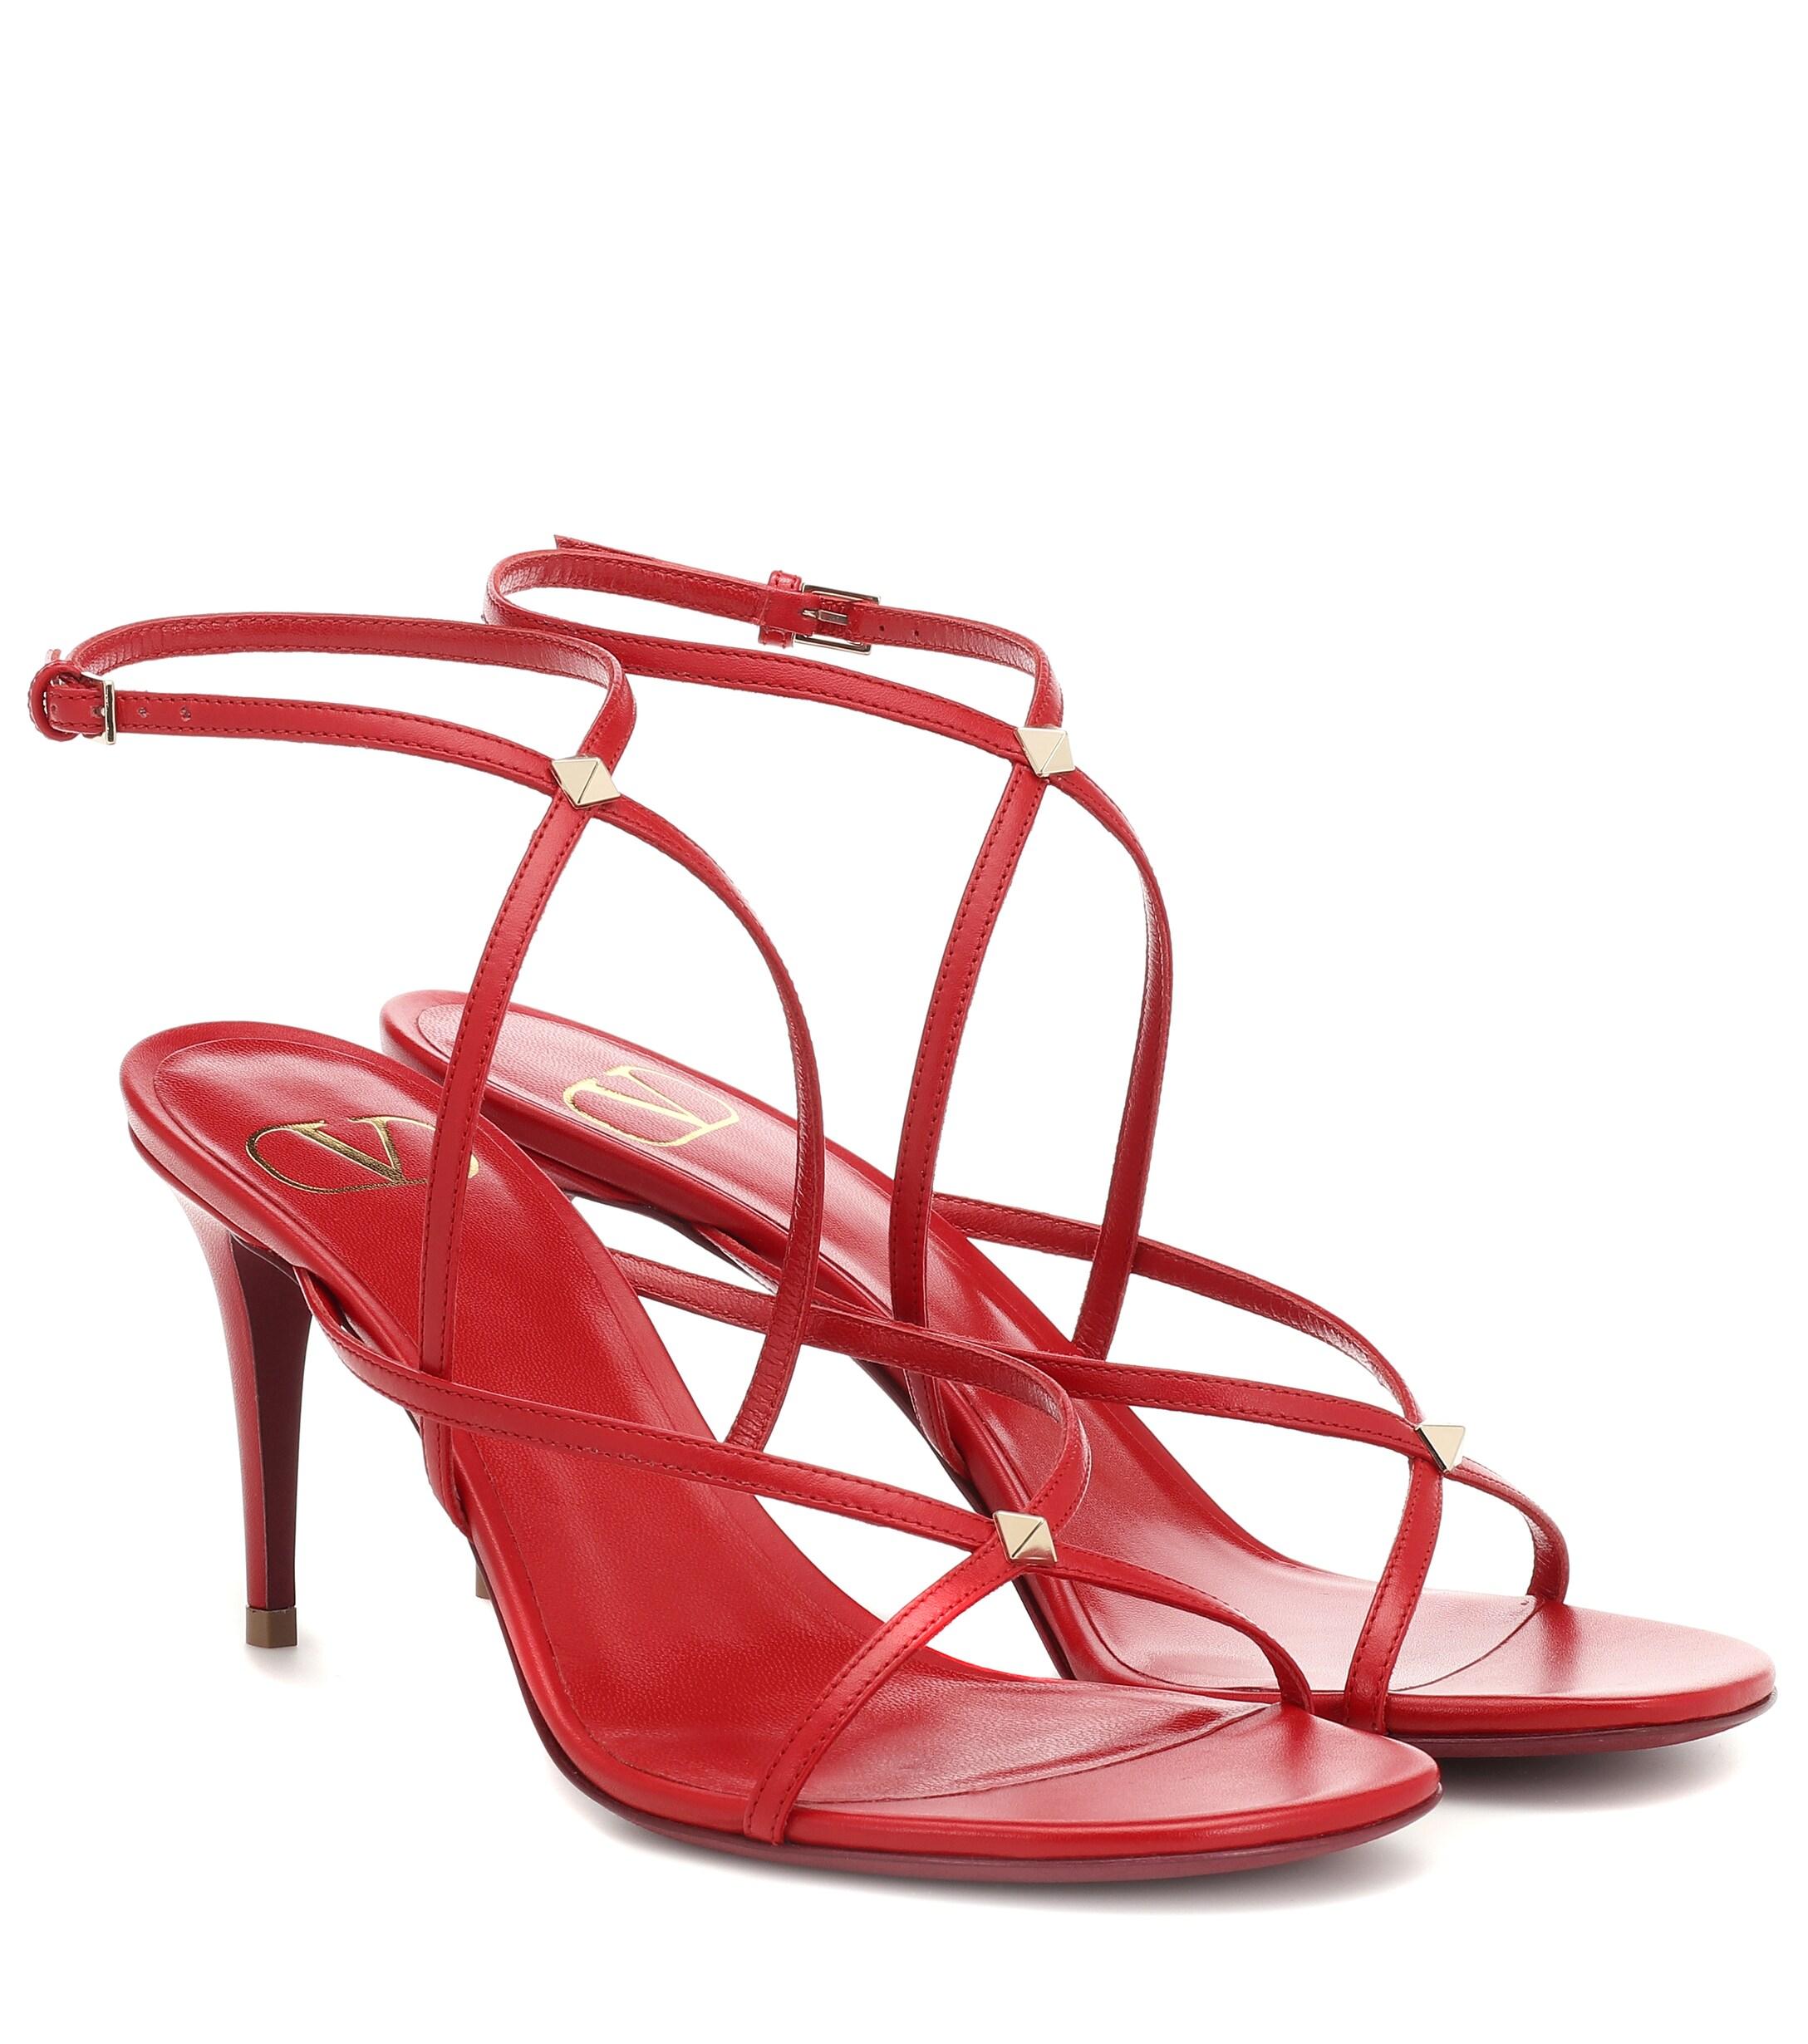 Valentino Rockstud Leather Sandals in Red - Lyst